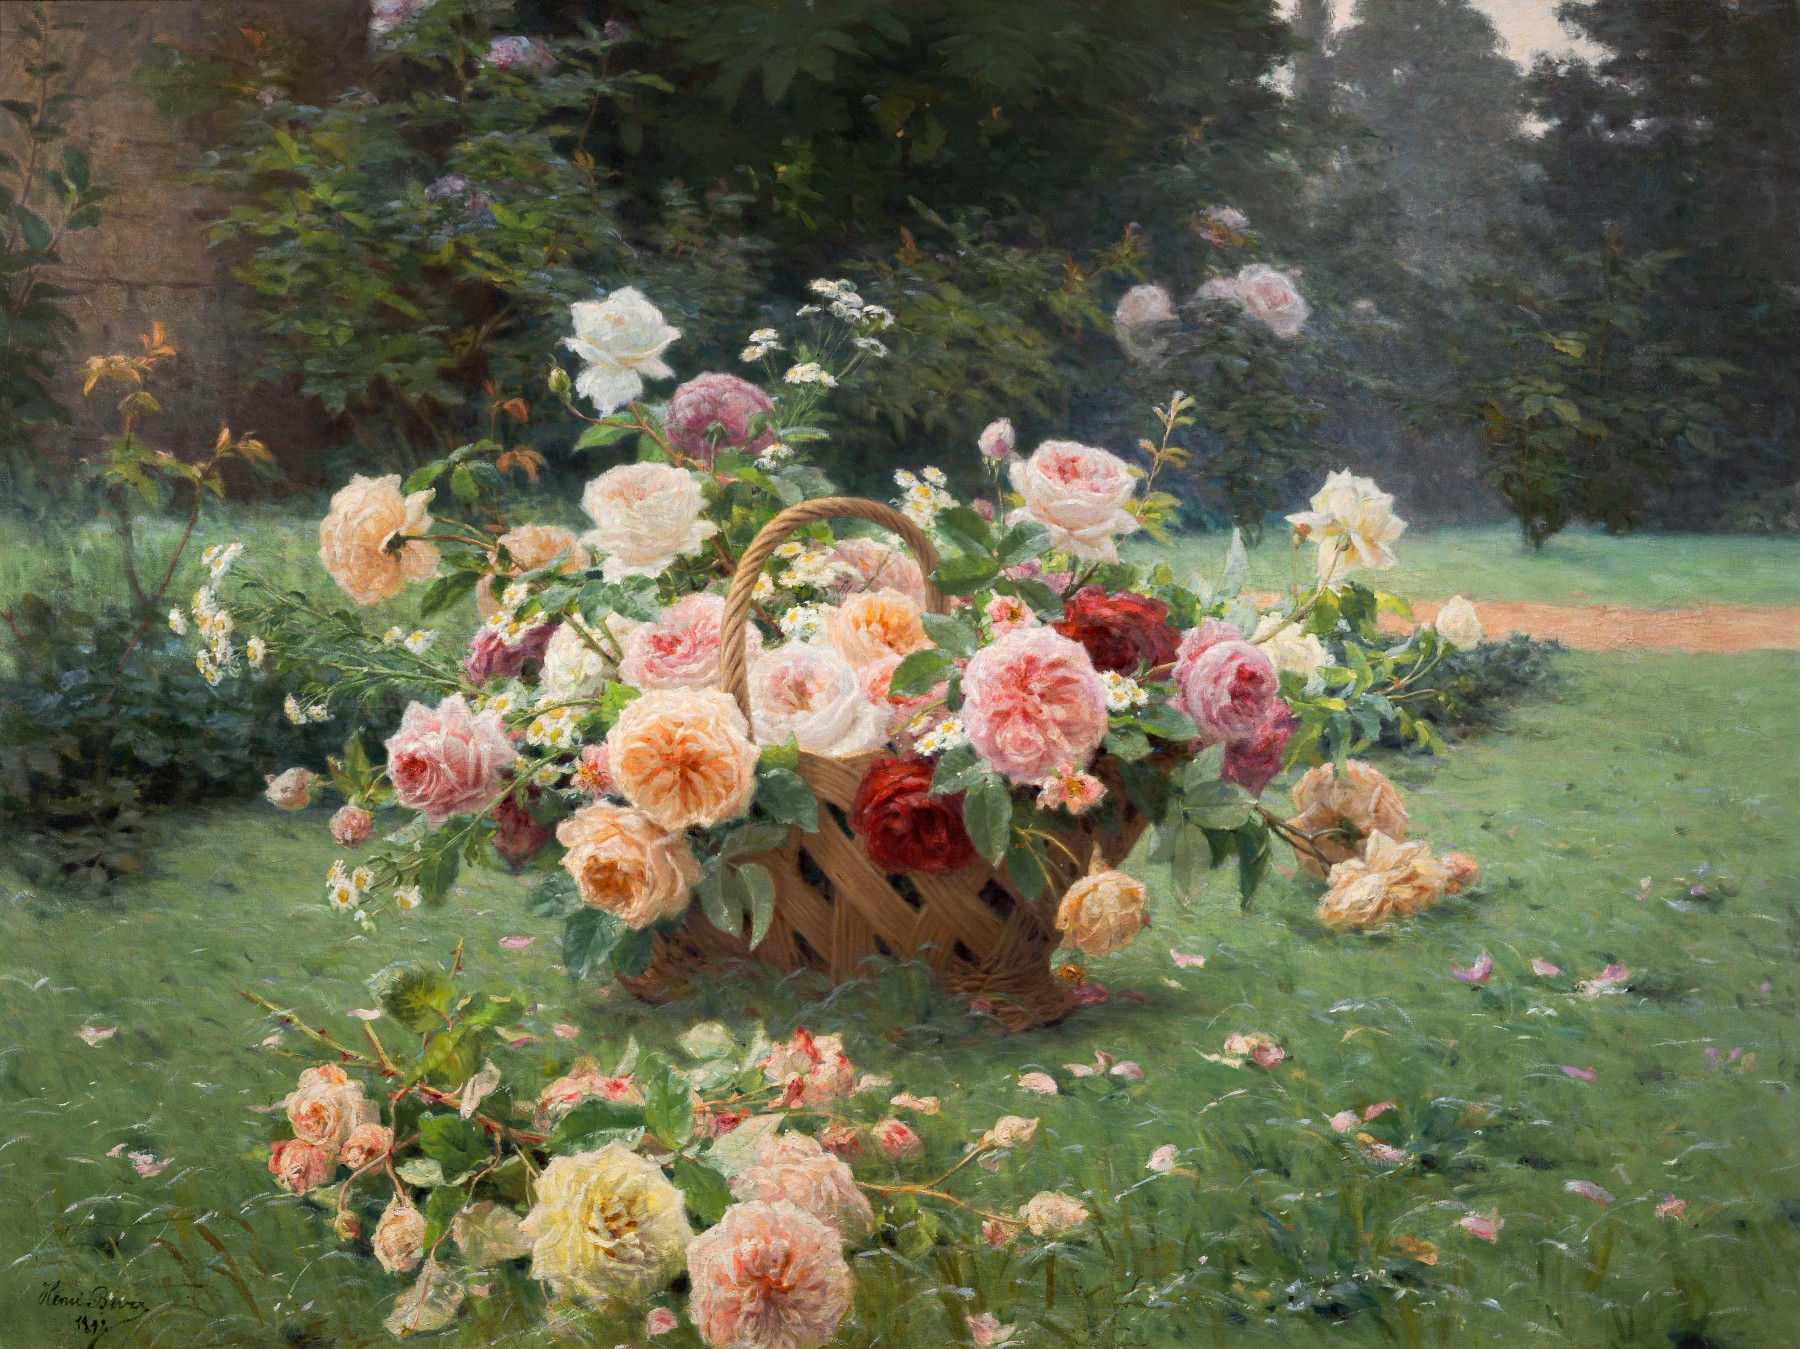 The Basket of Roses by Henri Biva - 1891 - 160 x 120 cm private collection